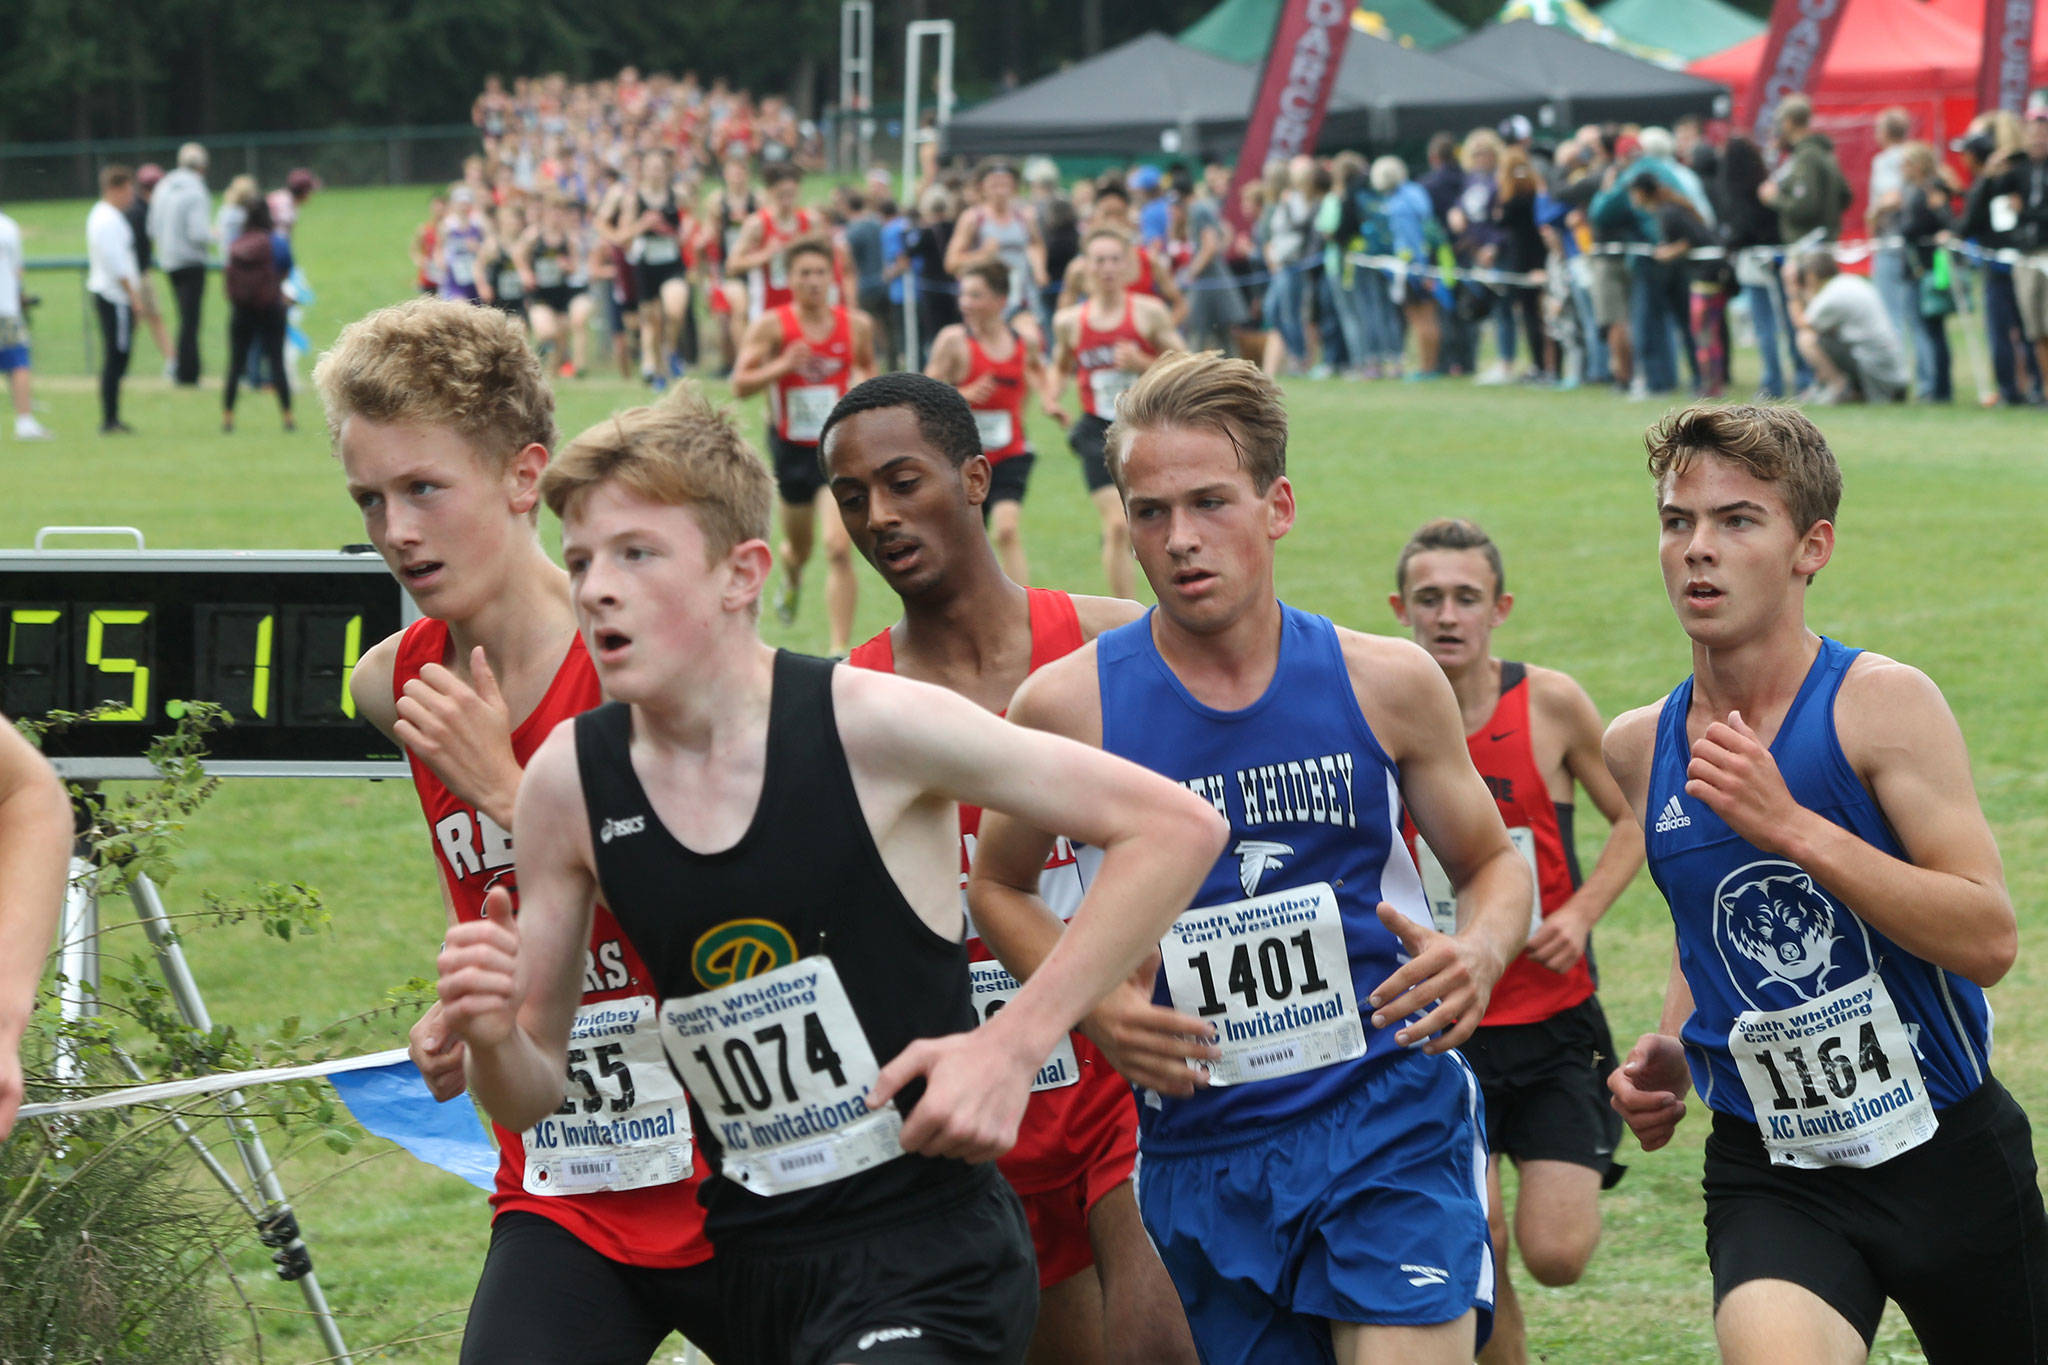 Michael Harwell (1401) runs with the lead pack.(Photo by Jim Waller/South Whidbey Record)